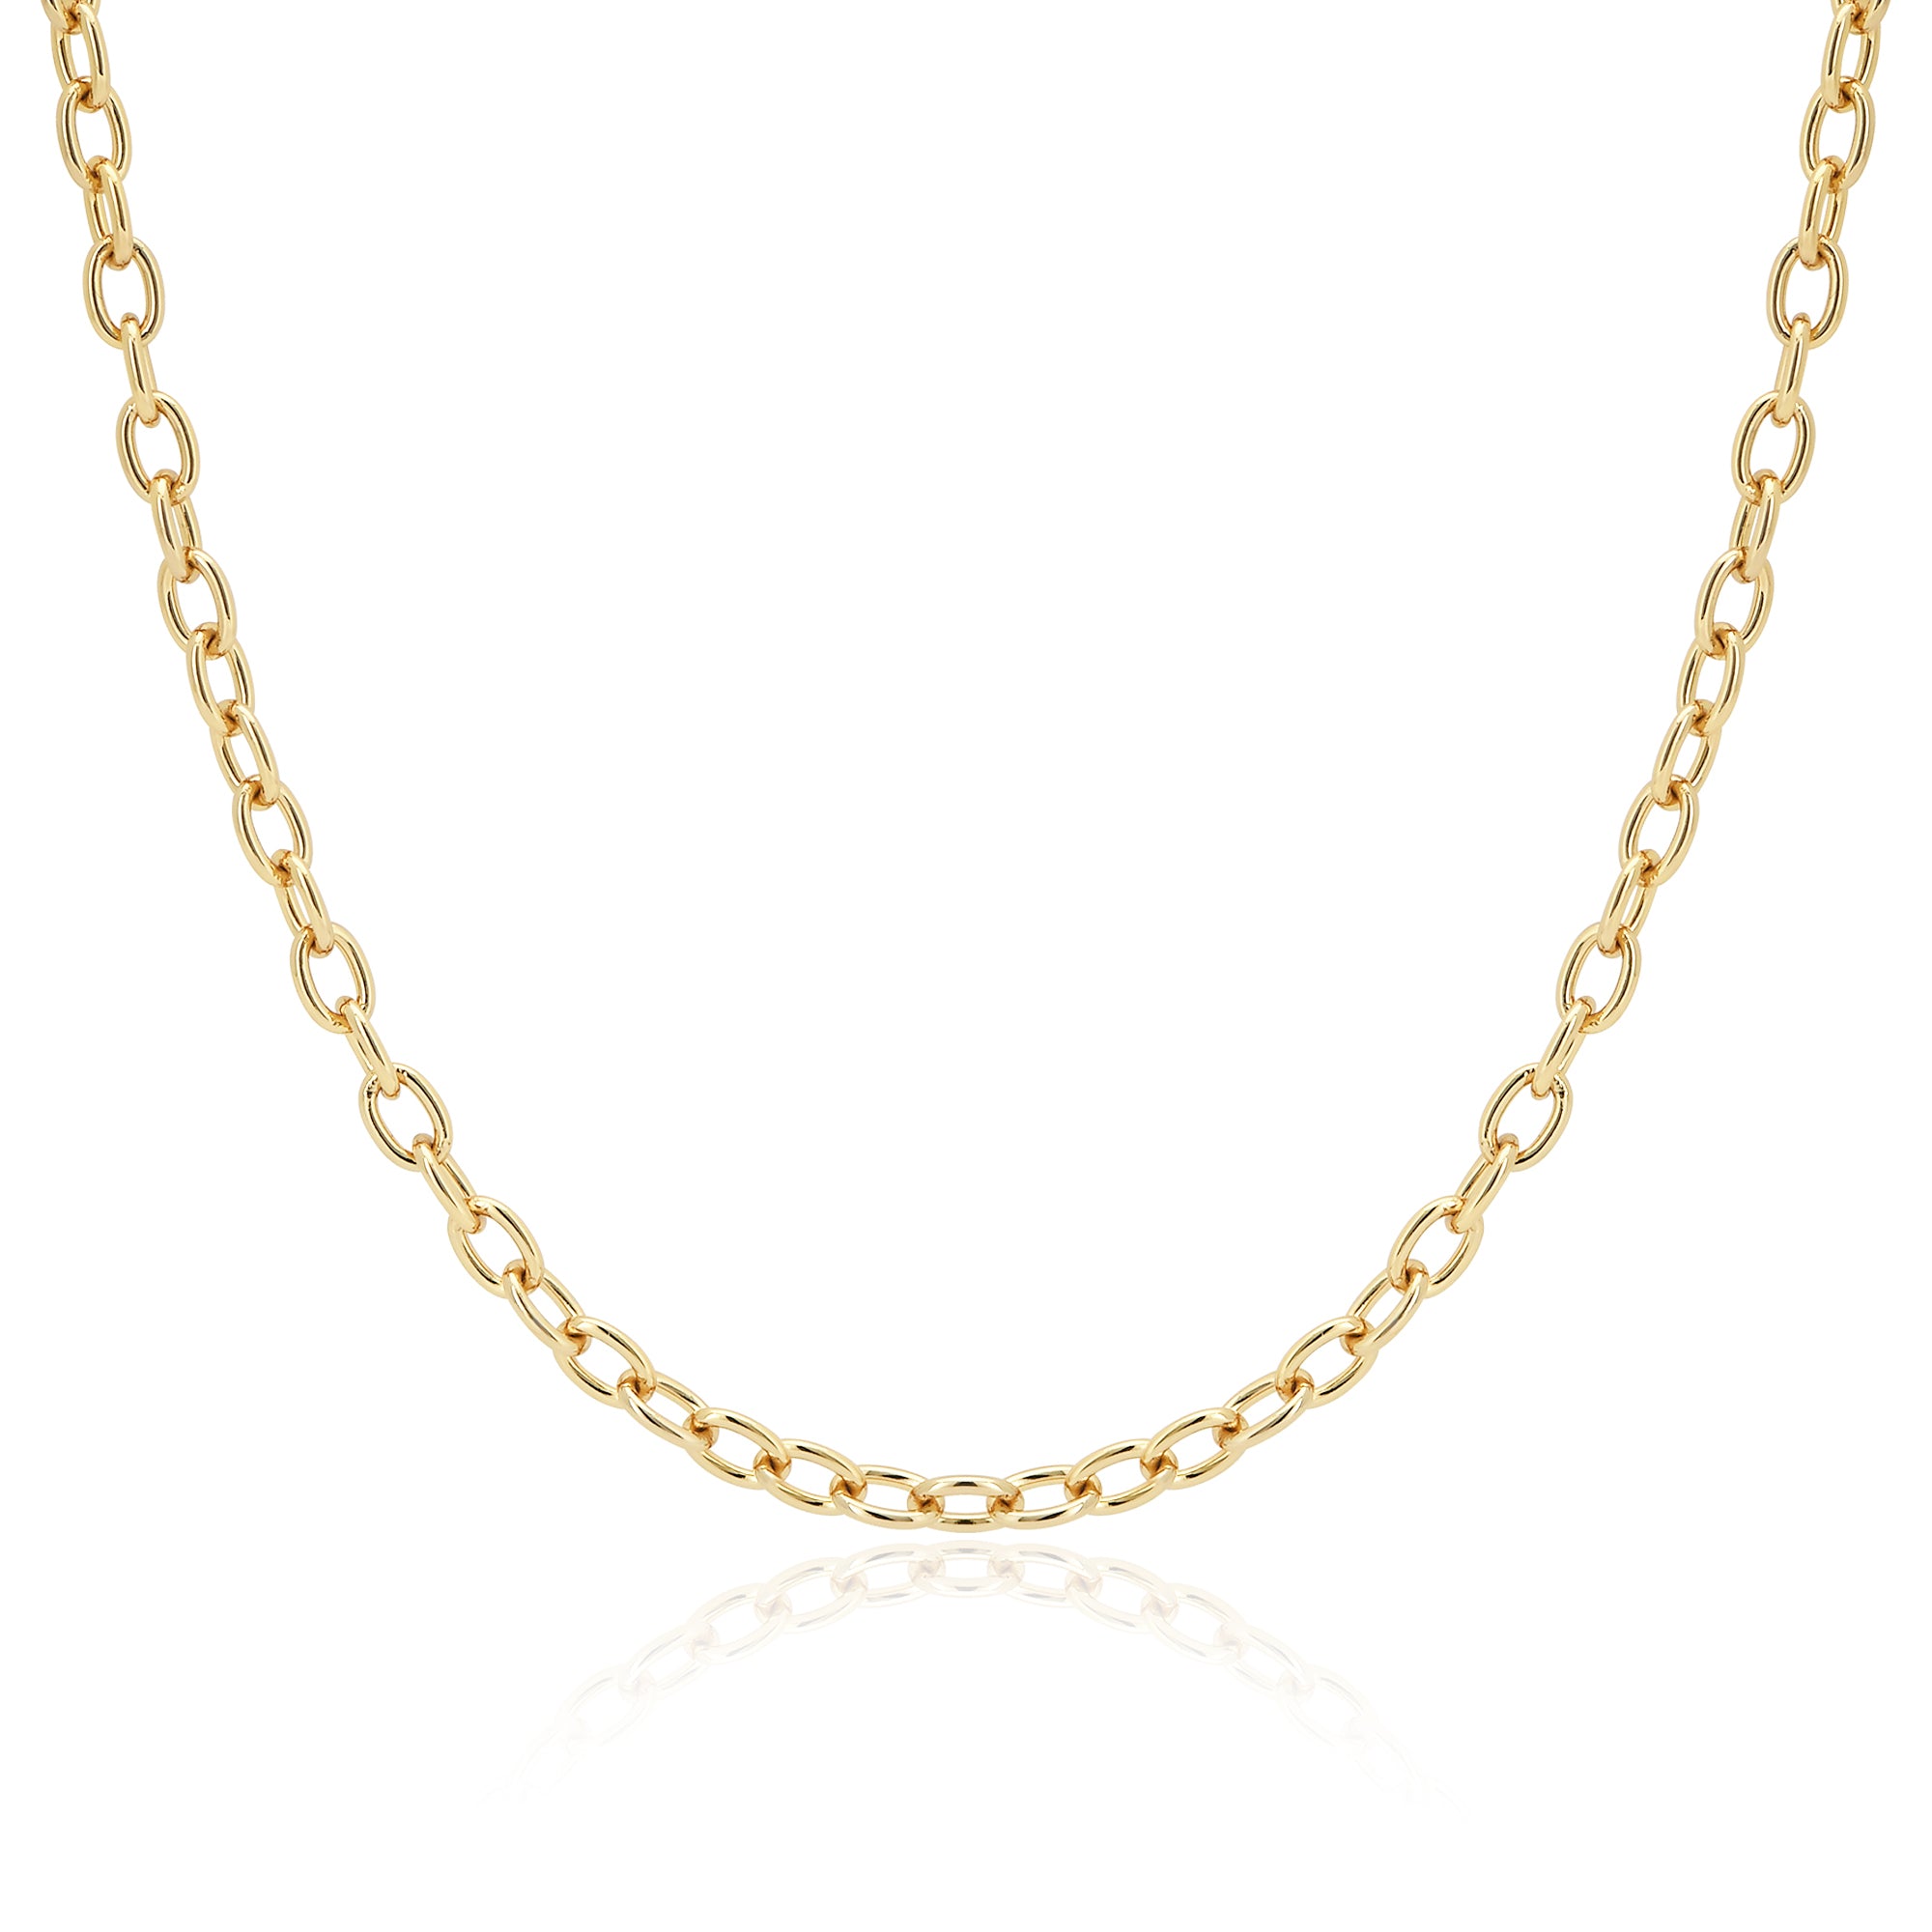 Presley Chain Necklace